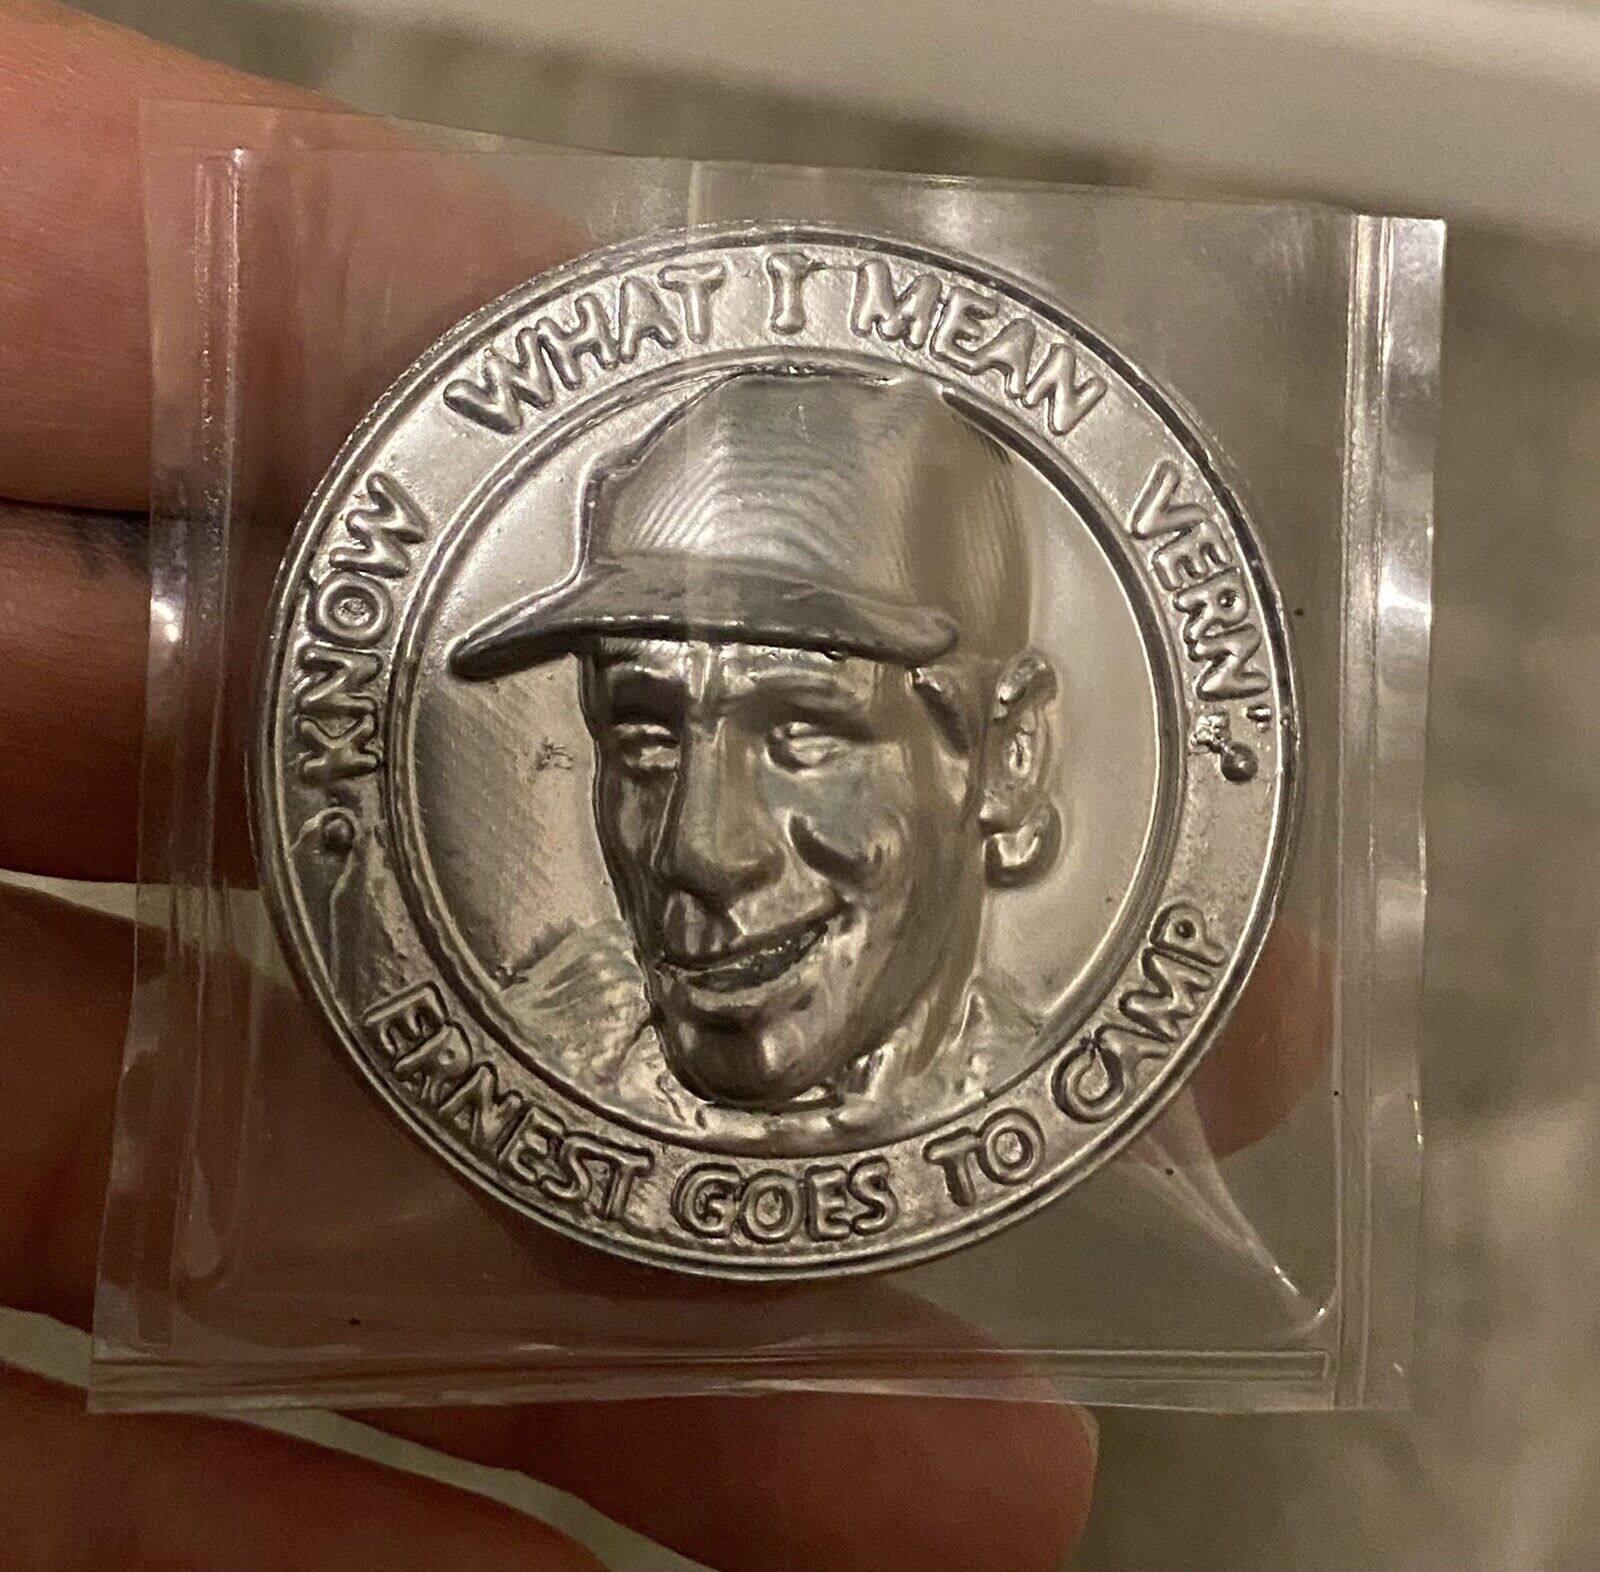 New Custom 3d Ernest P Worrell Jim Varney Double Sided Coin Ernest Goes To Camp